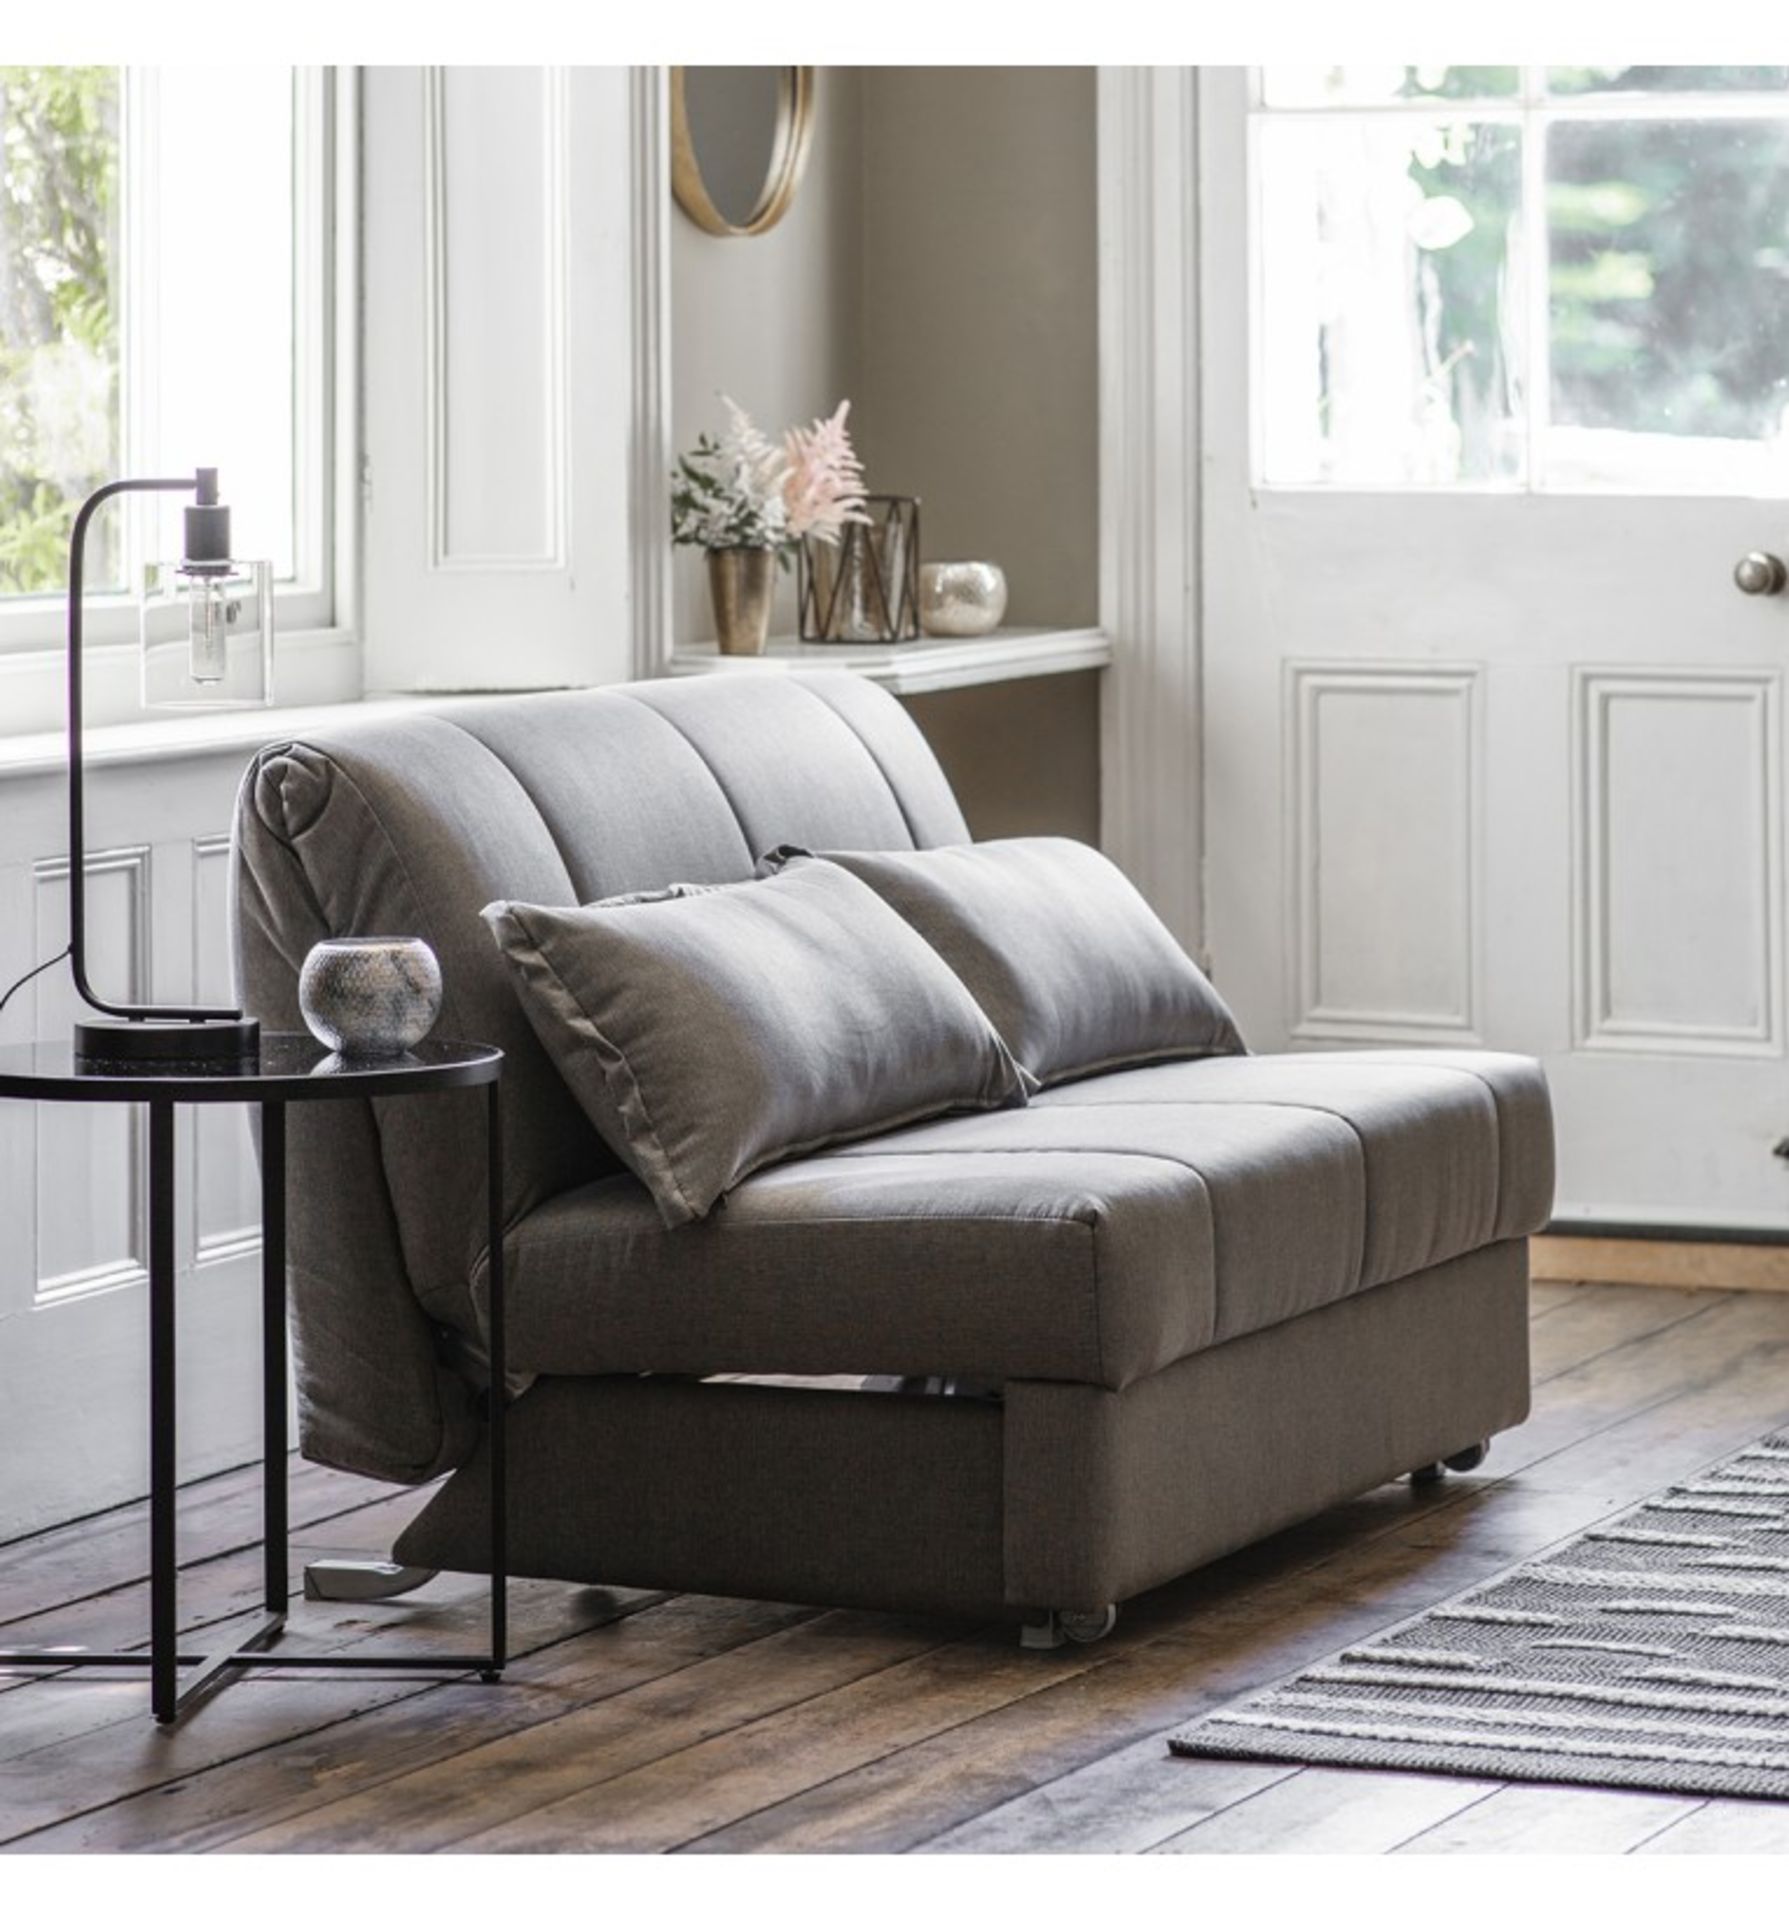 Metz Sofa 120cm Modena Mulberry Upholstered The Metz collection is ideal even for smaller spaces,